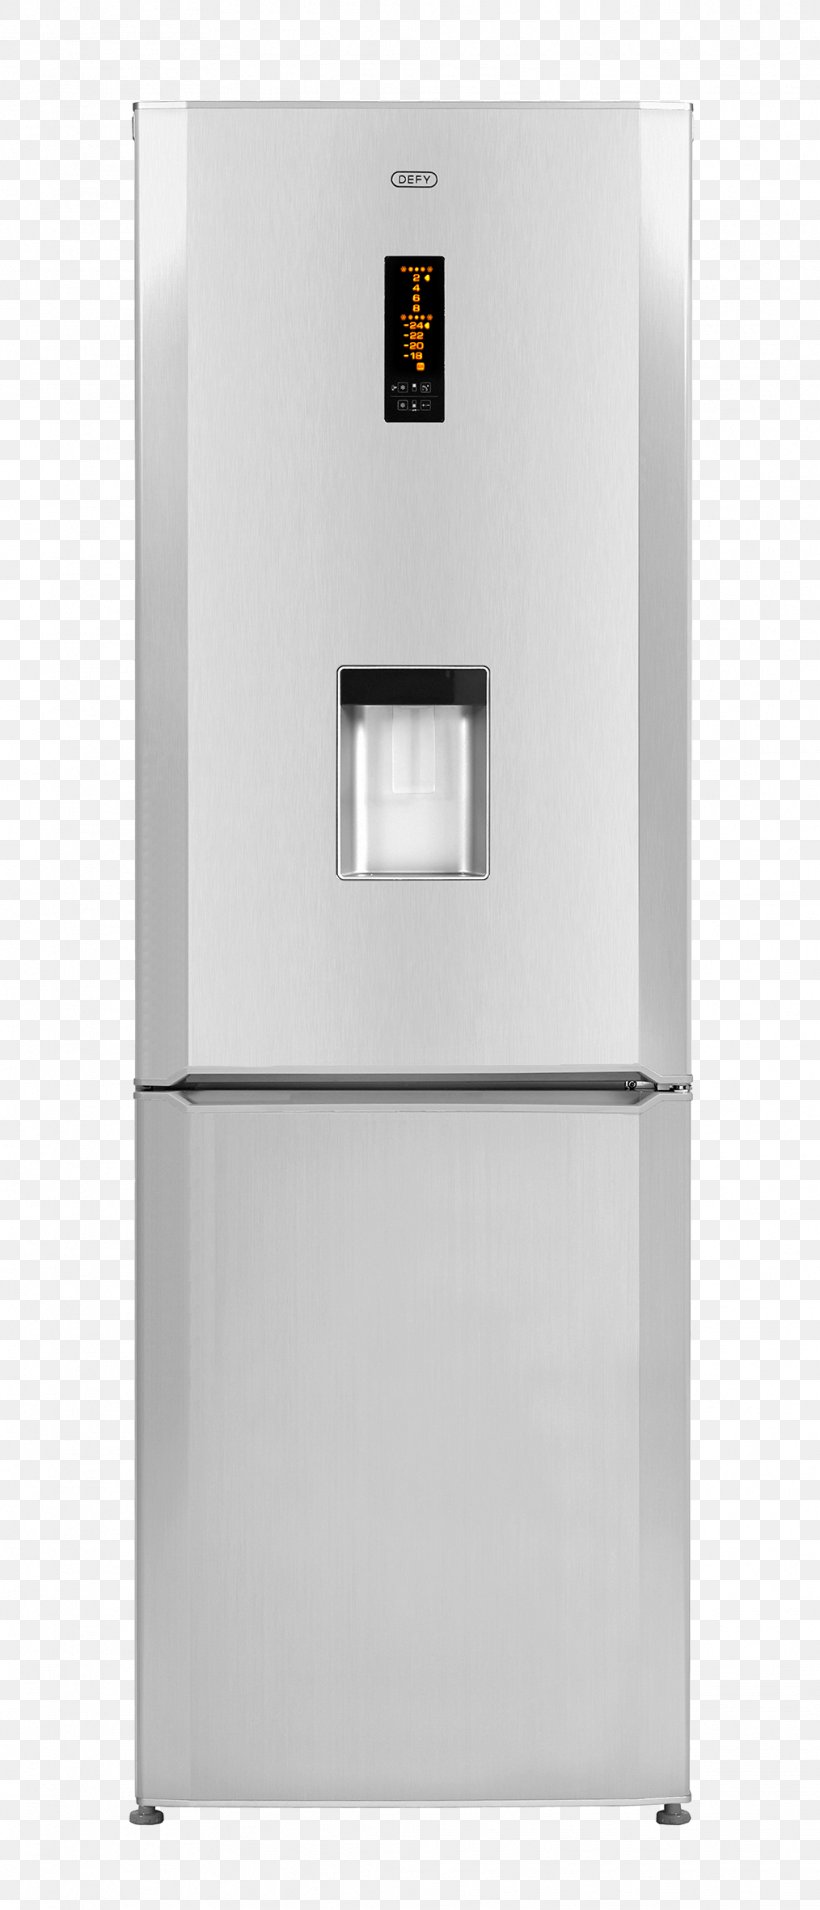 Refrigerator, PNG, 1014x2362px, Refrigerator, Home Appliance, Kitchen Appliance, Major Appliance Download Free